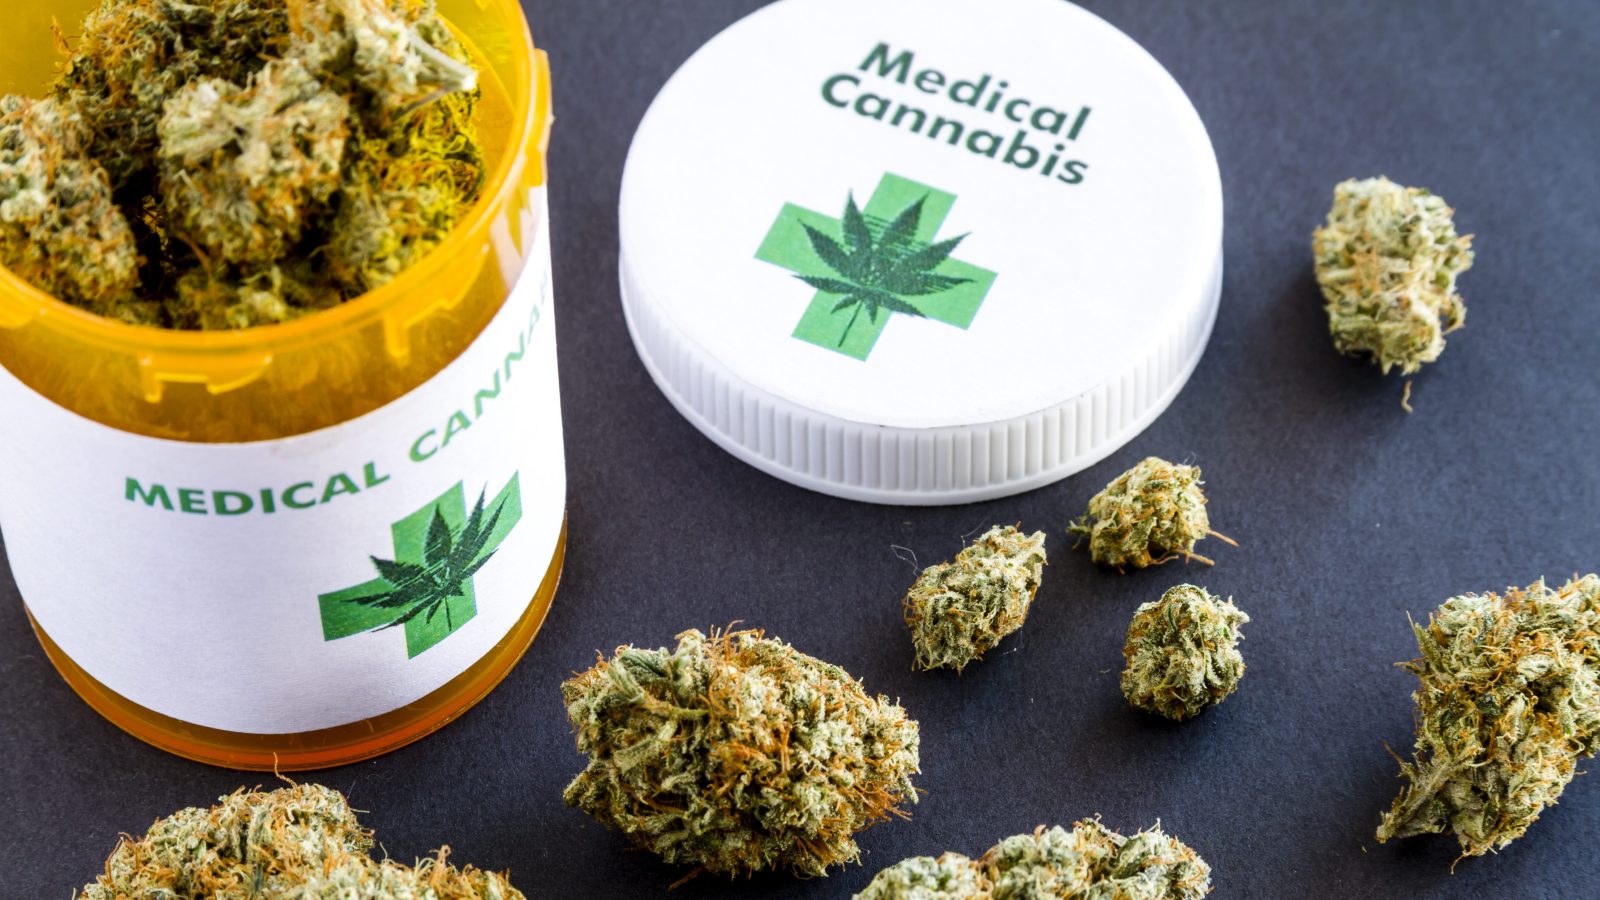 Virginia Cannabis Control Authority to regulate the state’s medical cannabis program in new year